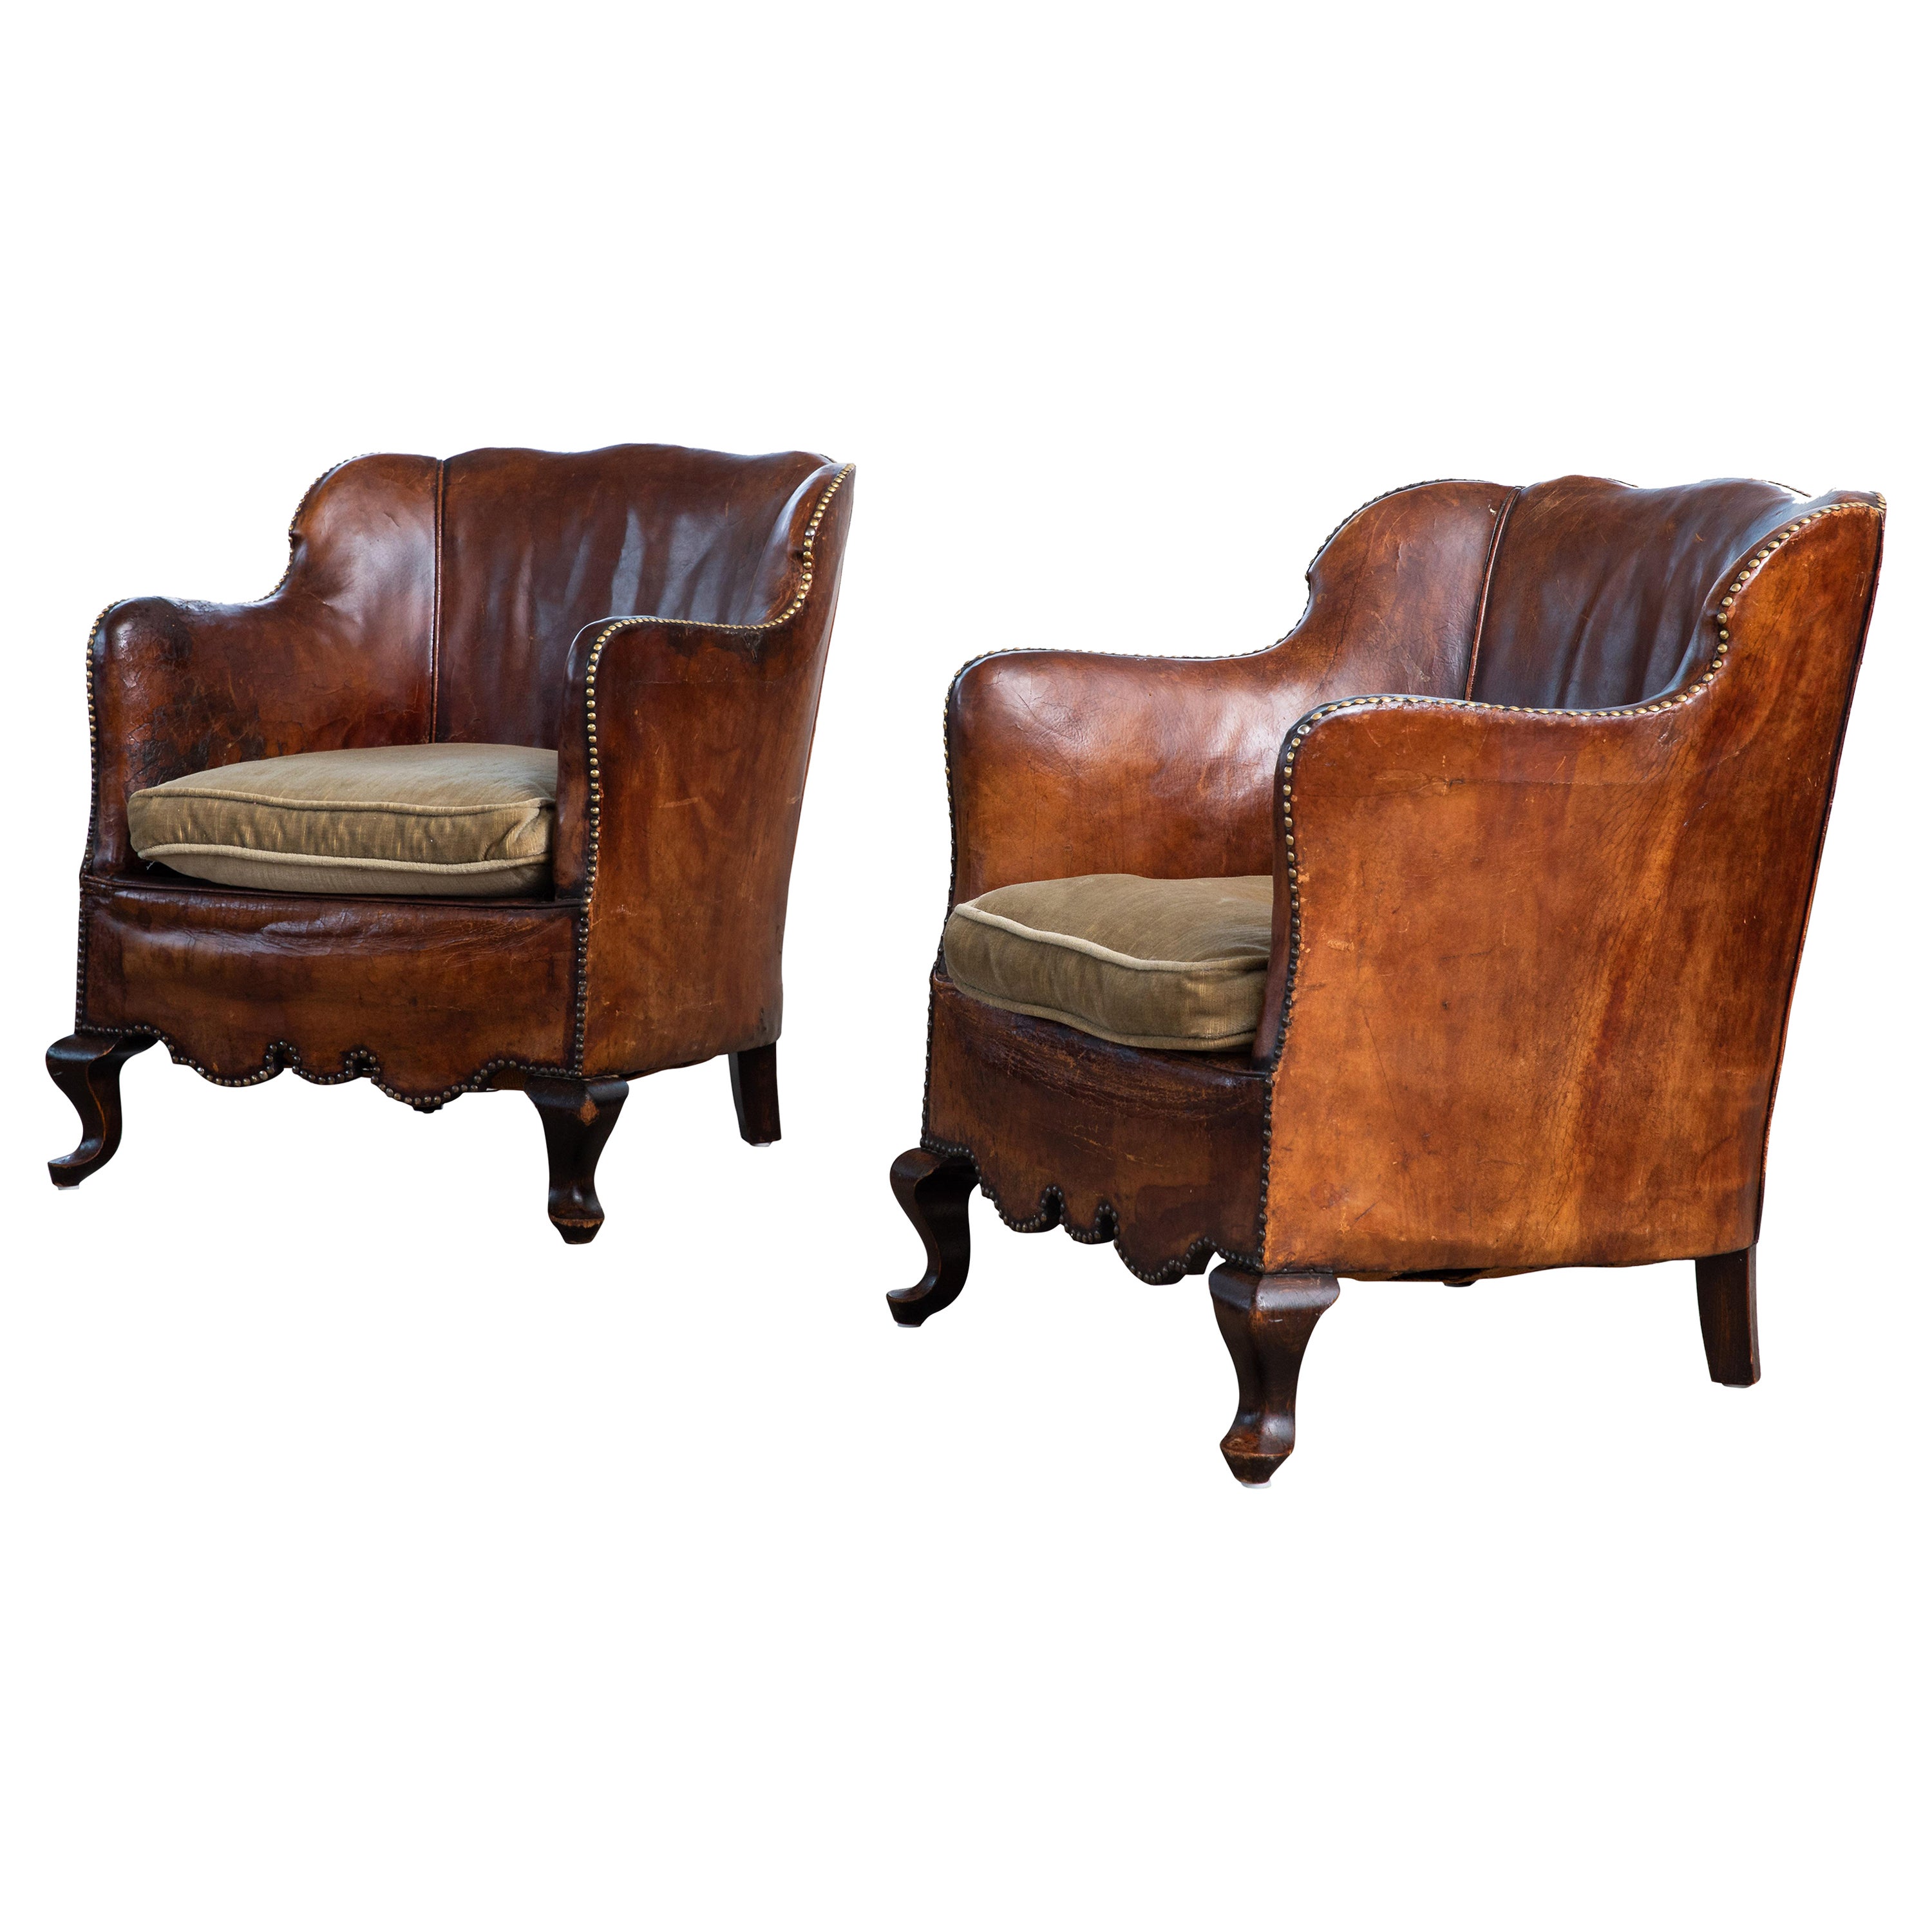 Pair of Classic Danish Club or Library Chairs in Cognac Color Patinated Leather